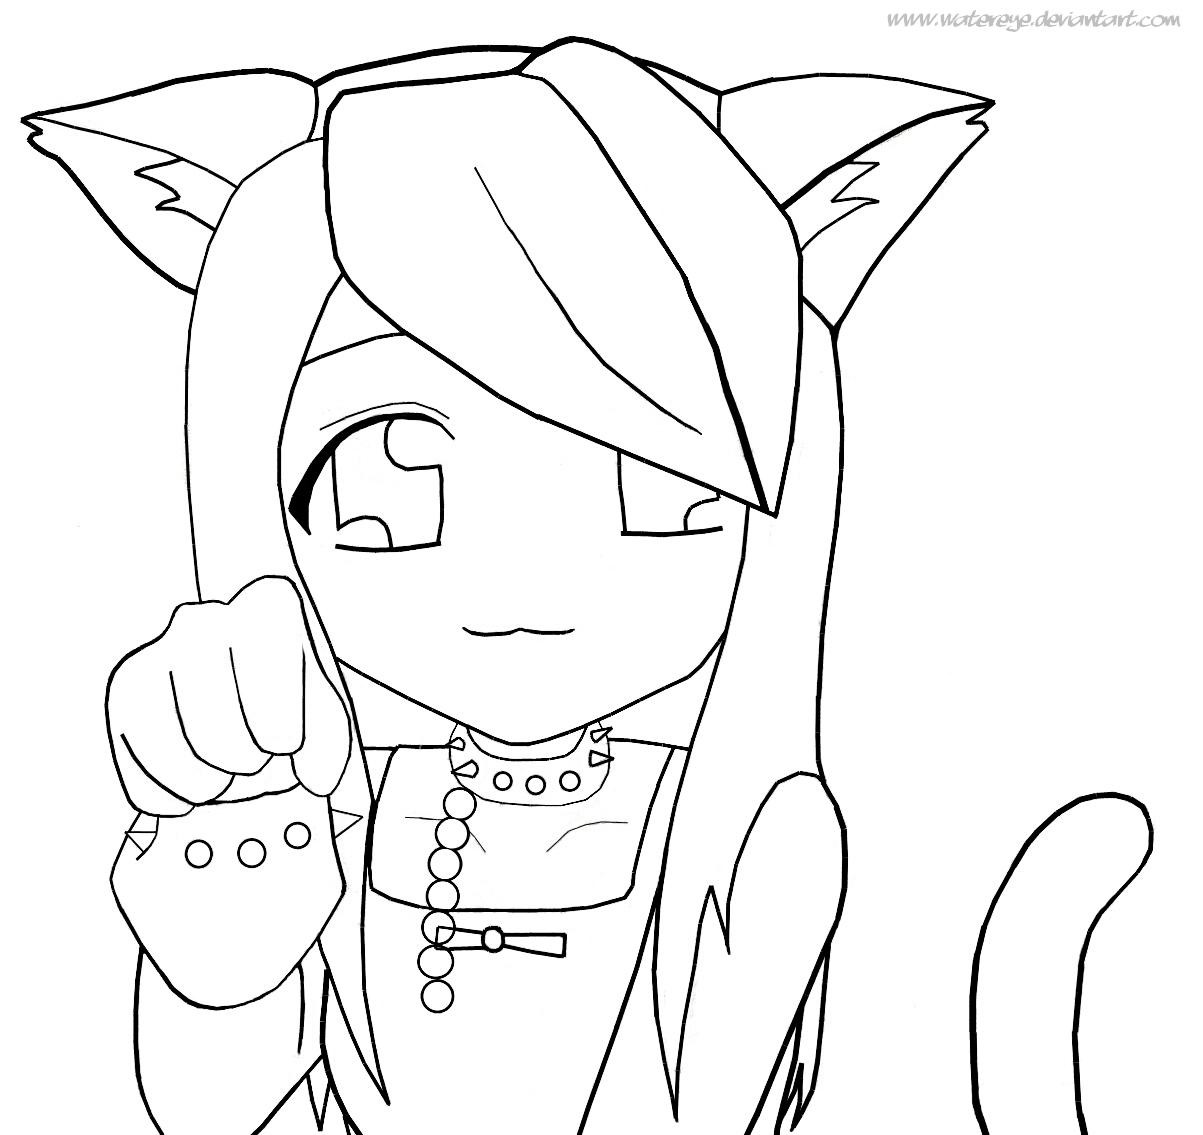 Anime Boys Coloring Pages Easy
 Neko girl Lineart by watereye on DeviantArt